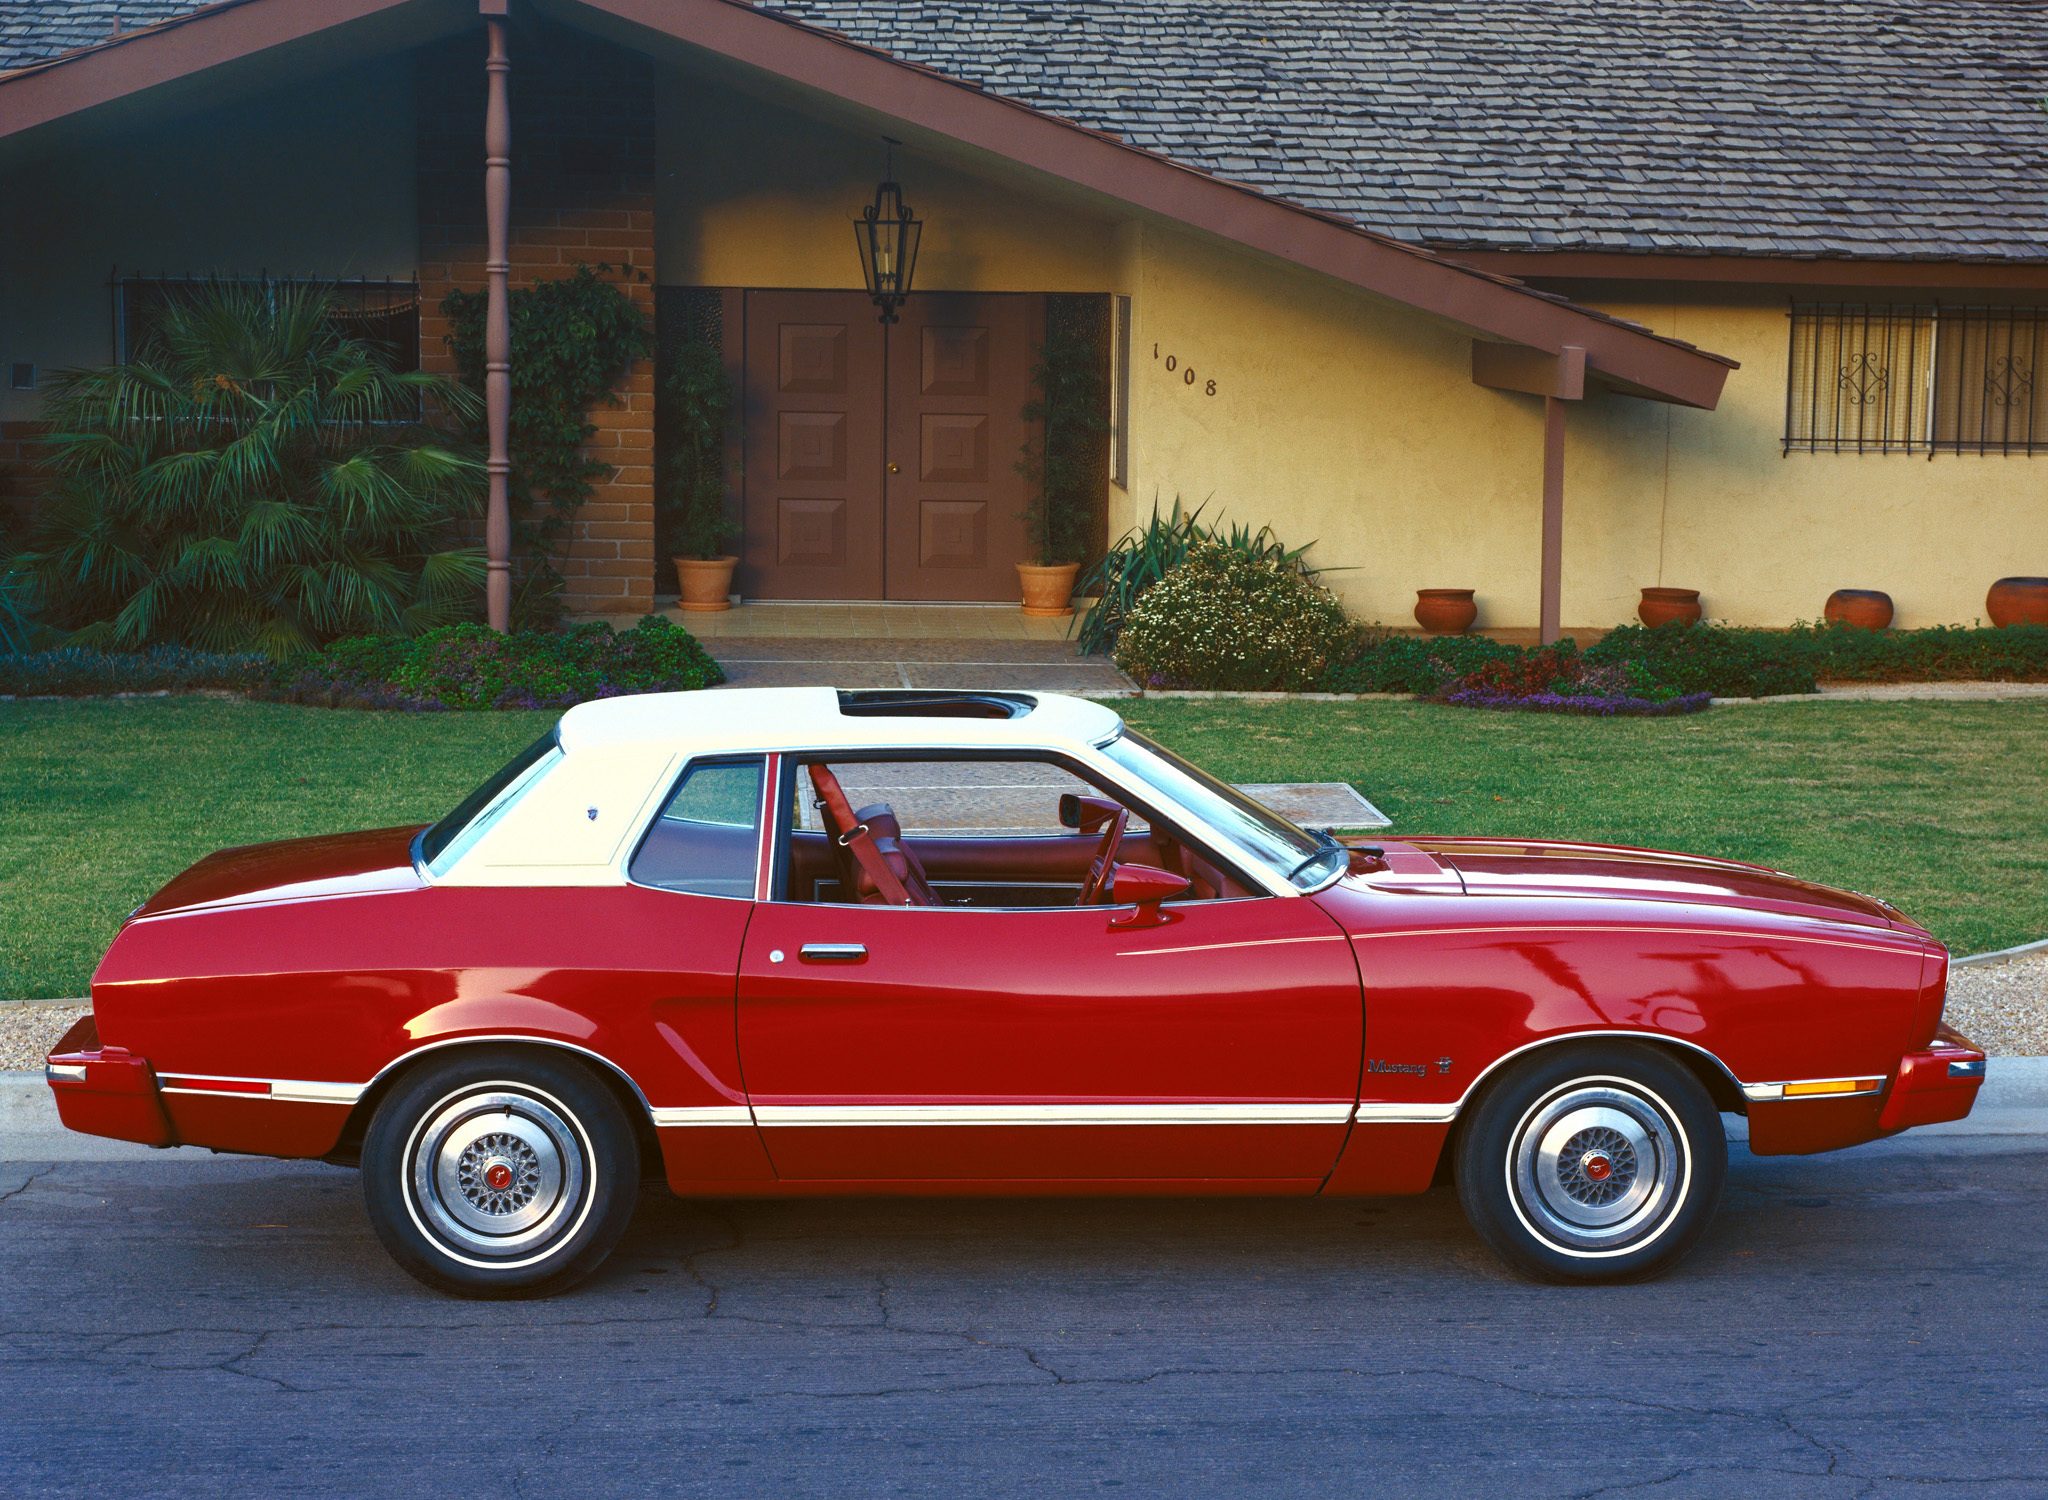 Mustang Of The Day: 1974 Ford Mustang Ghia